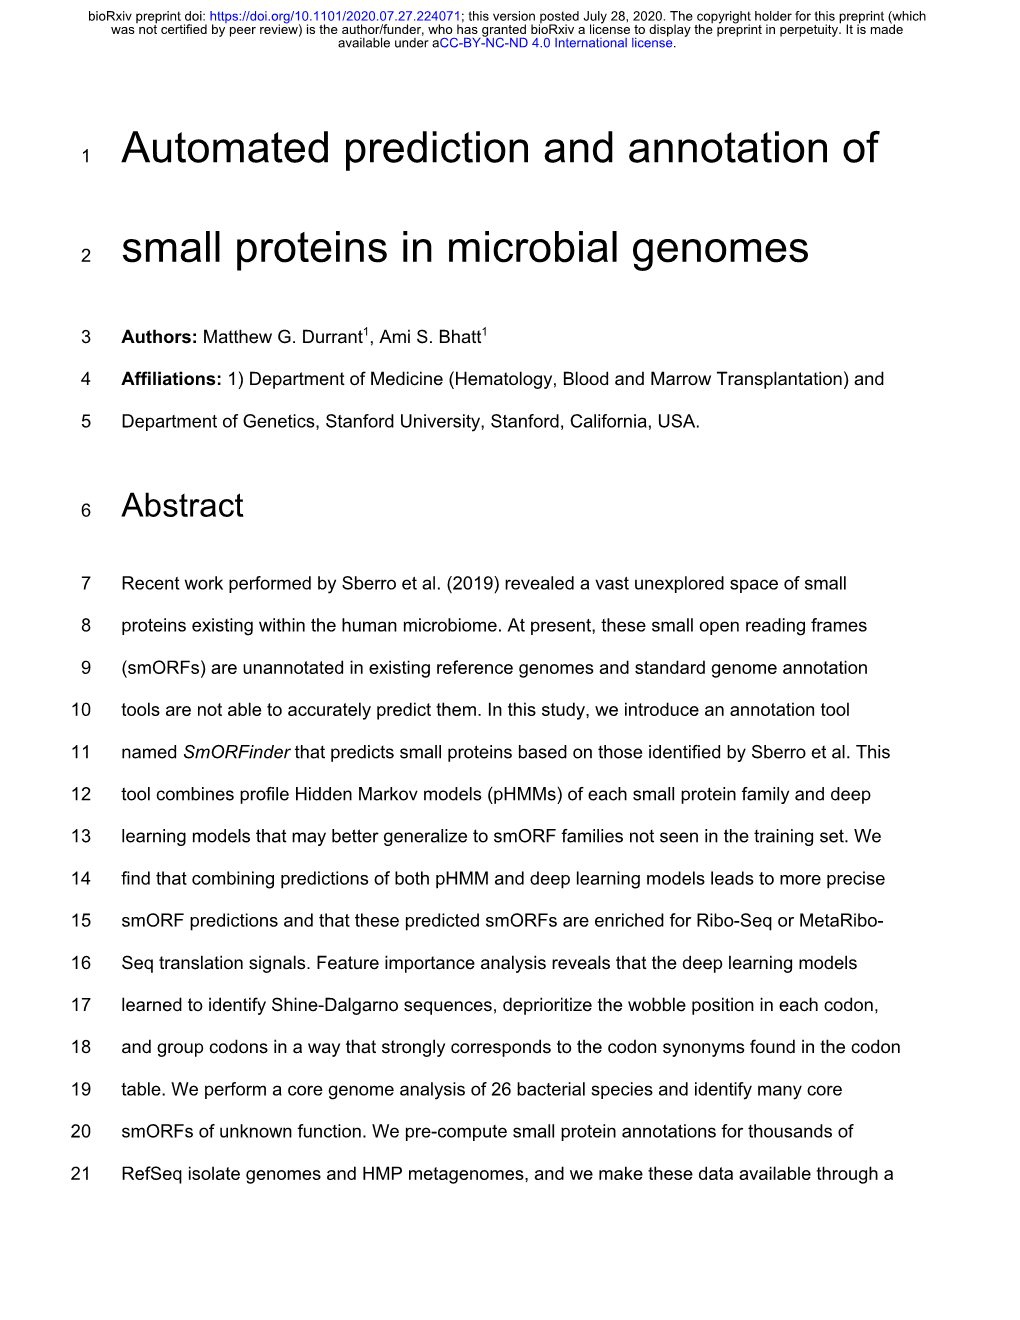 Automated Prediction and Annotation of Small Proteins in Microbial